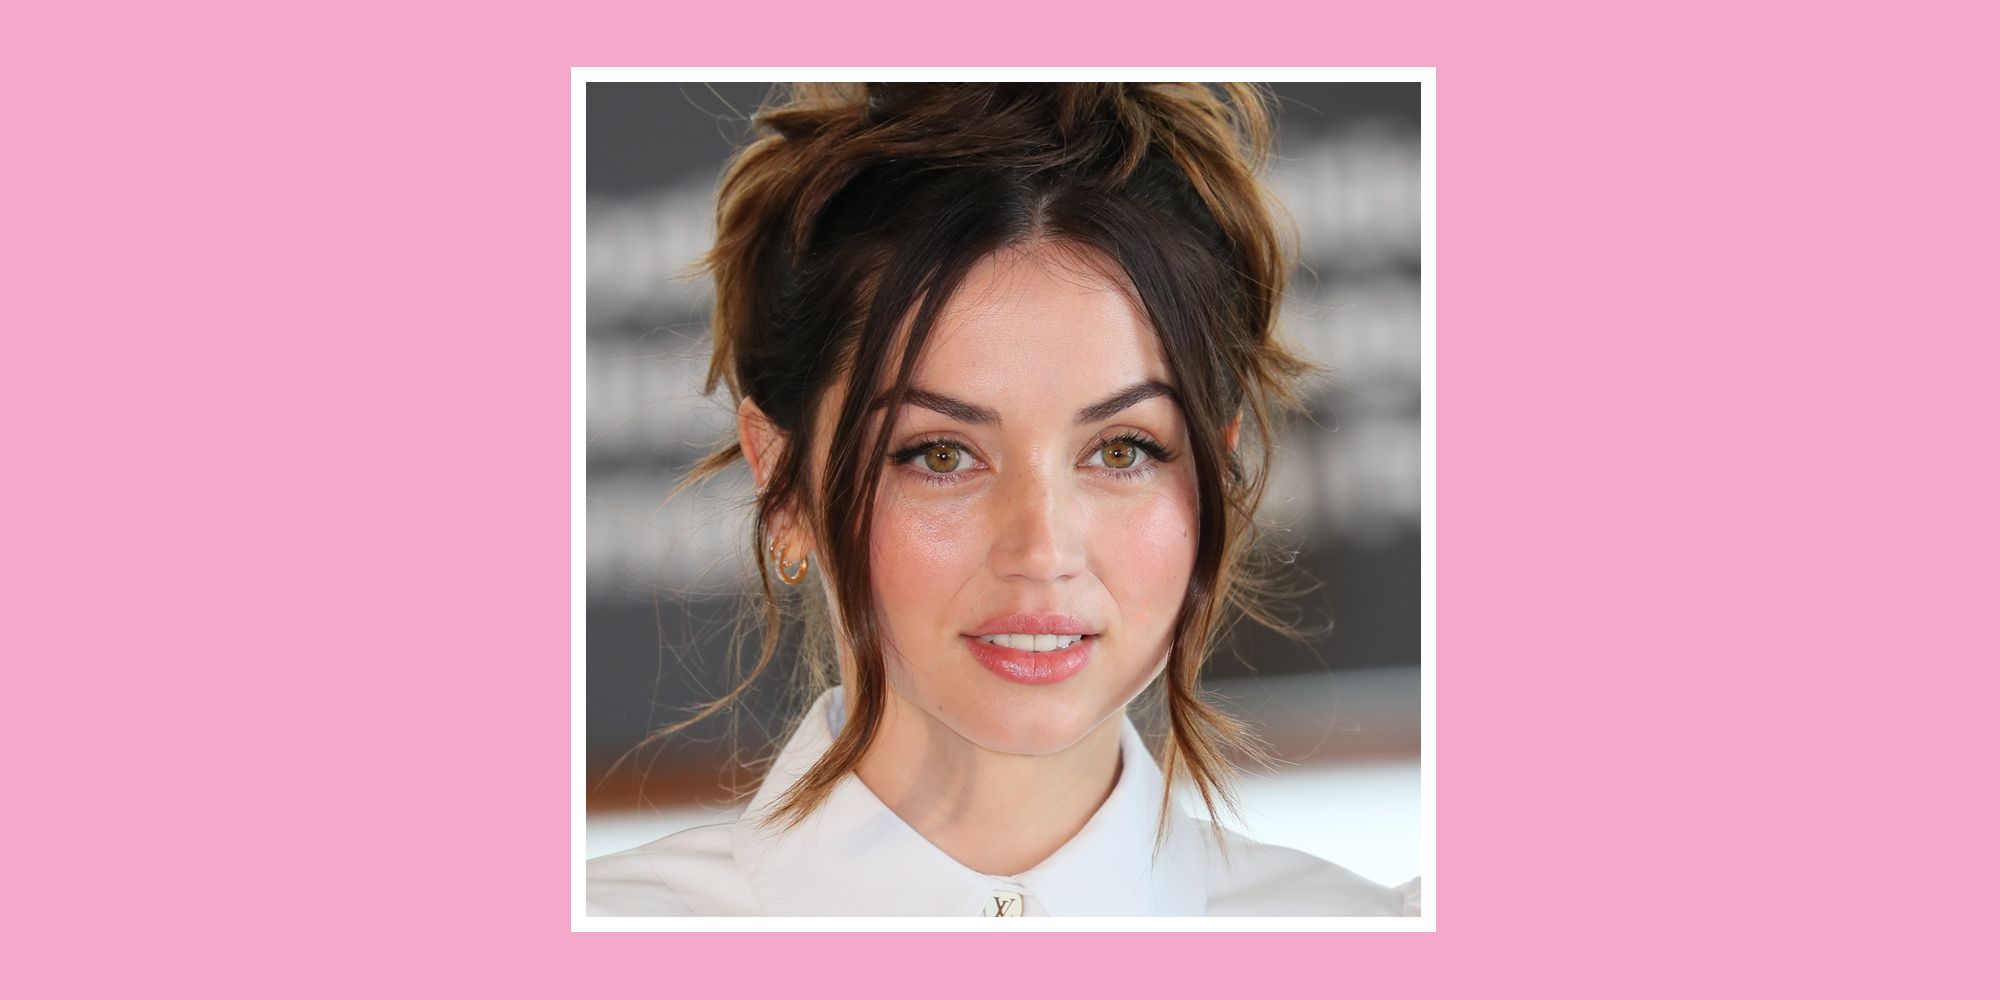 Ana de Armas, 33, On Her Favorite Skincare Products And More picture image